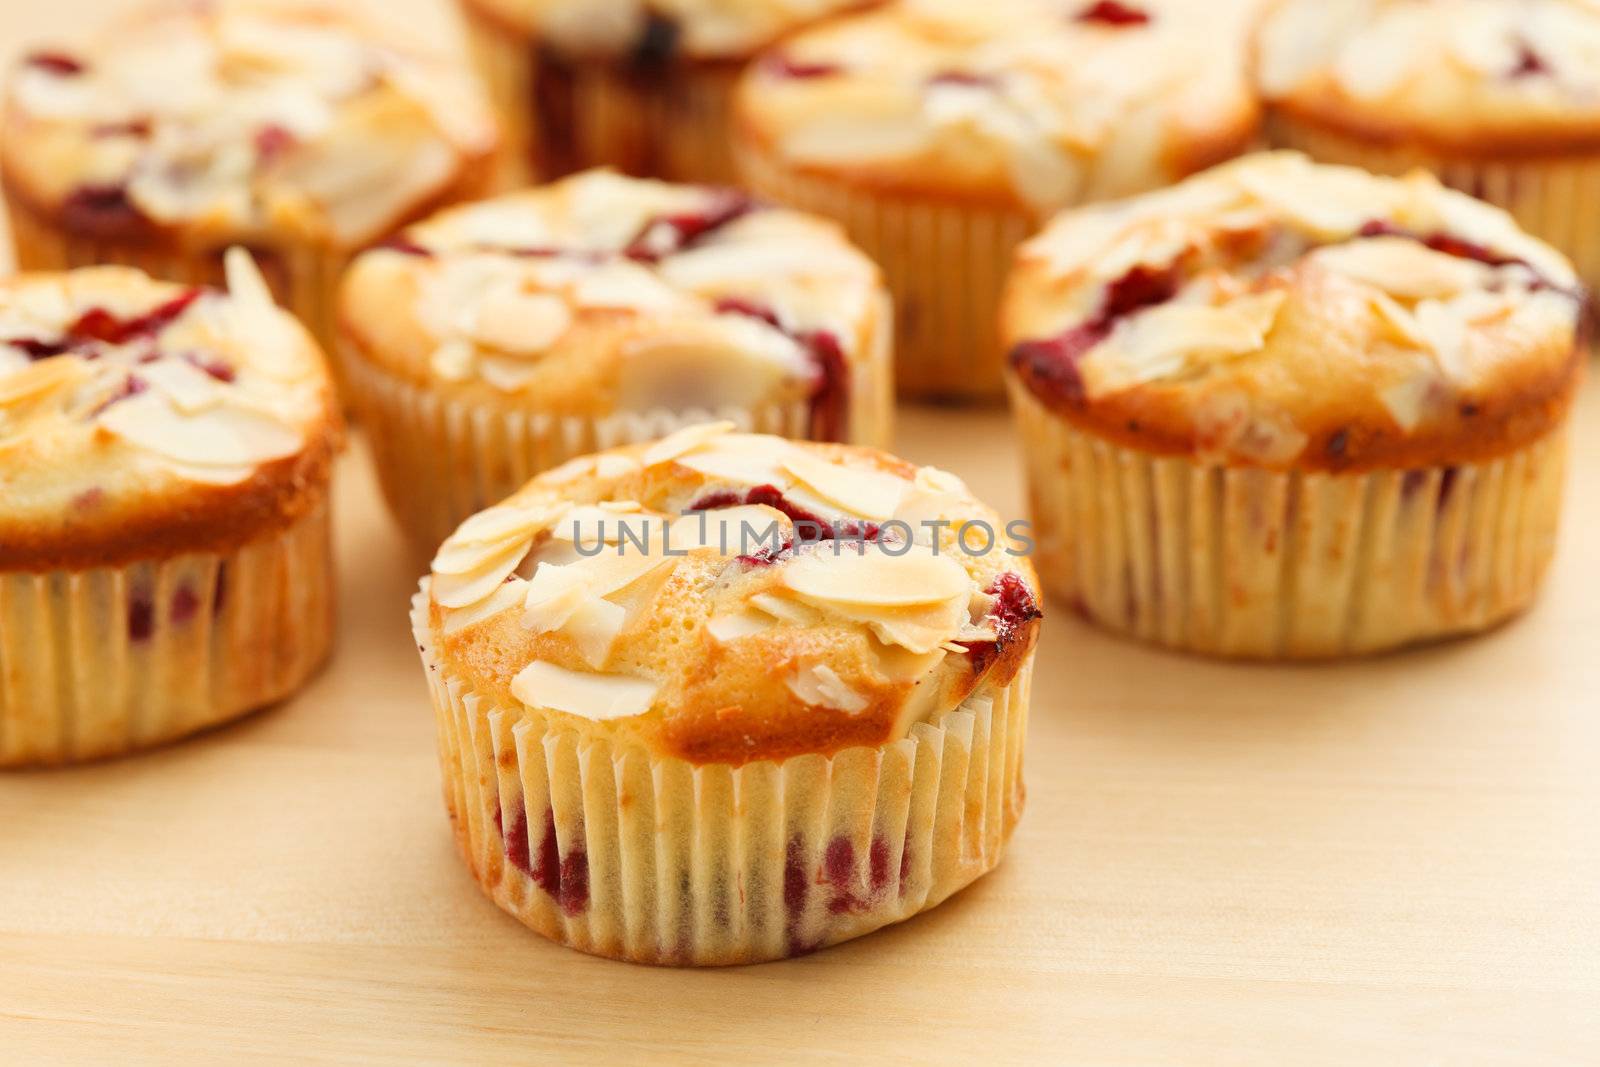 muffins with almond and blueberries by shebeko